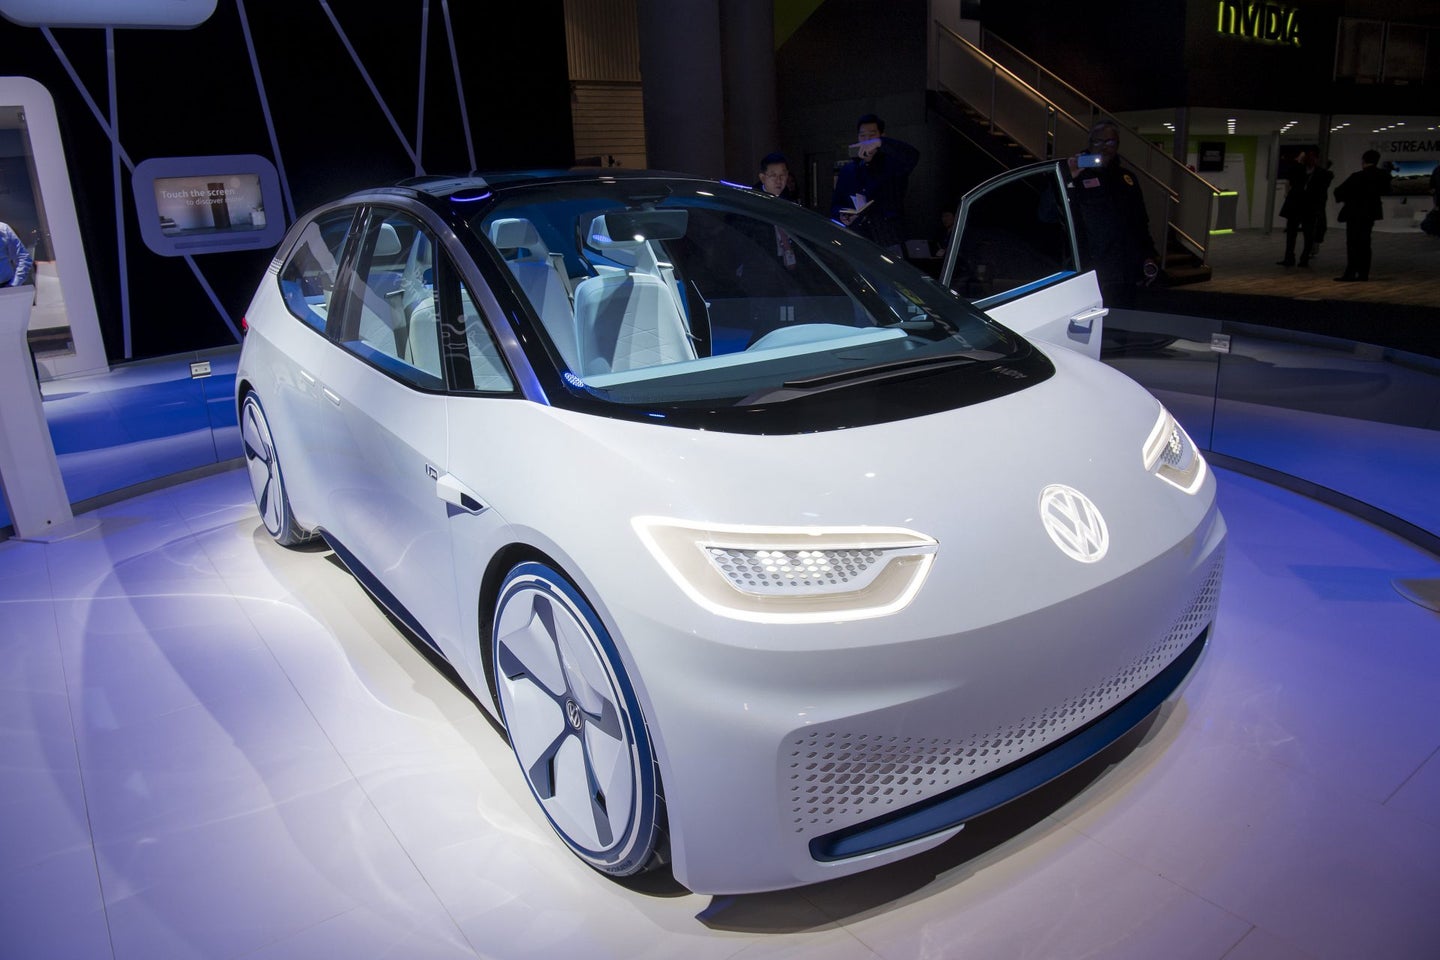 Volkswagen’s New Design Language May Show the Future of Electric Vehicle Forms